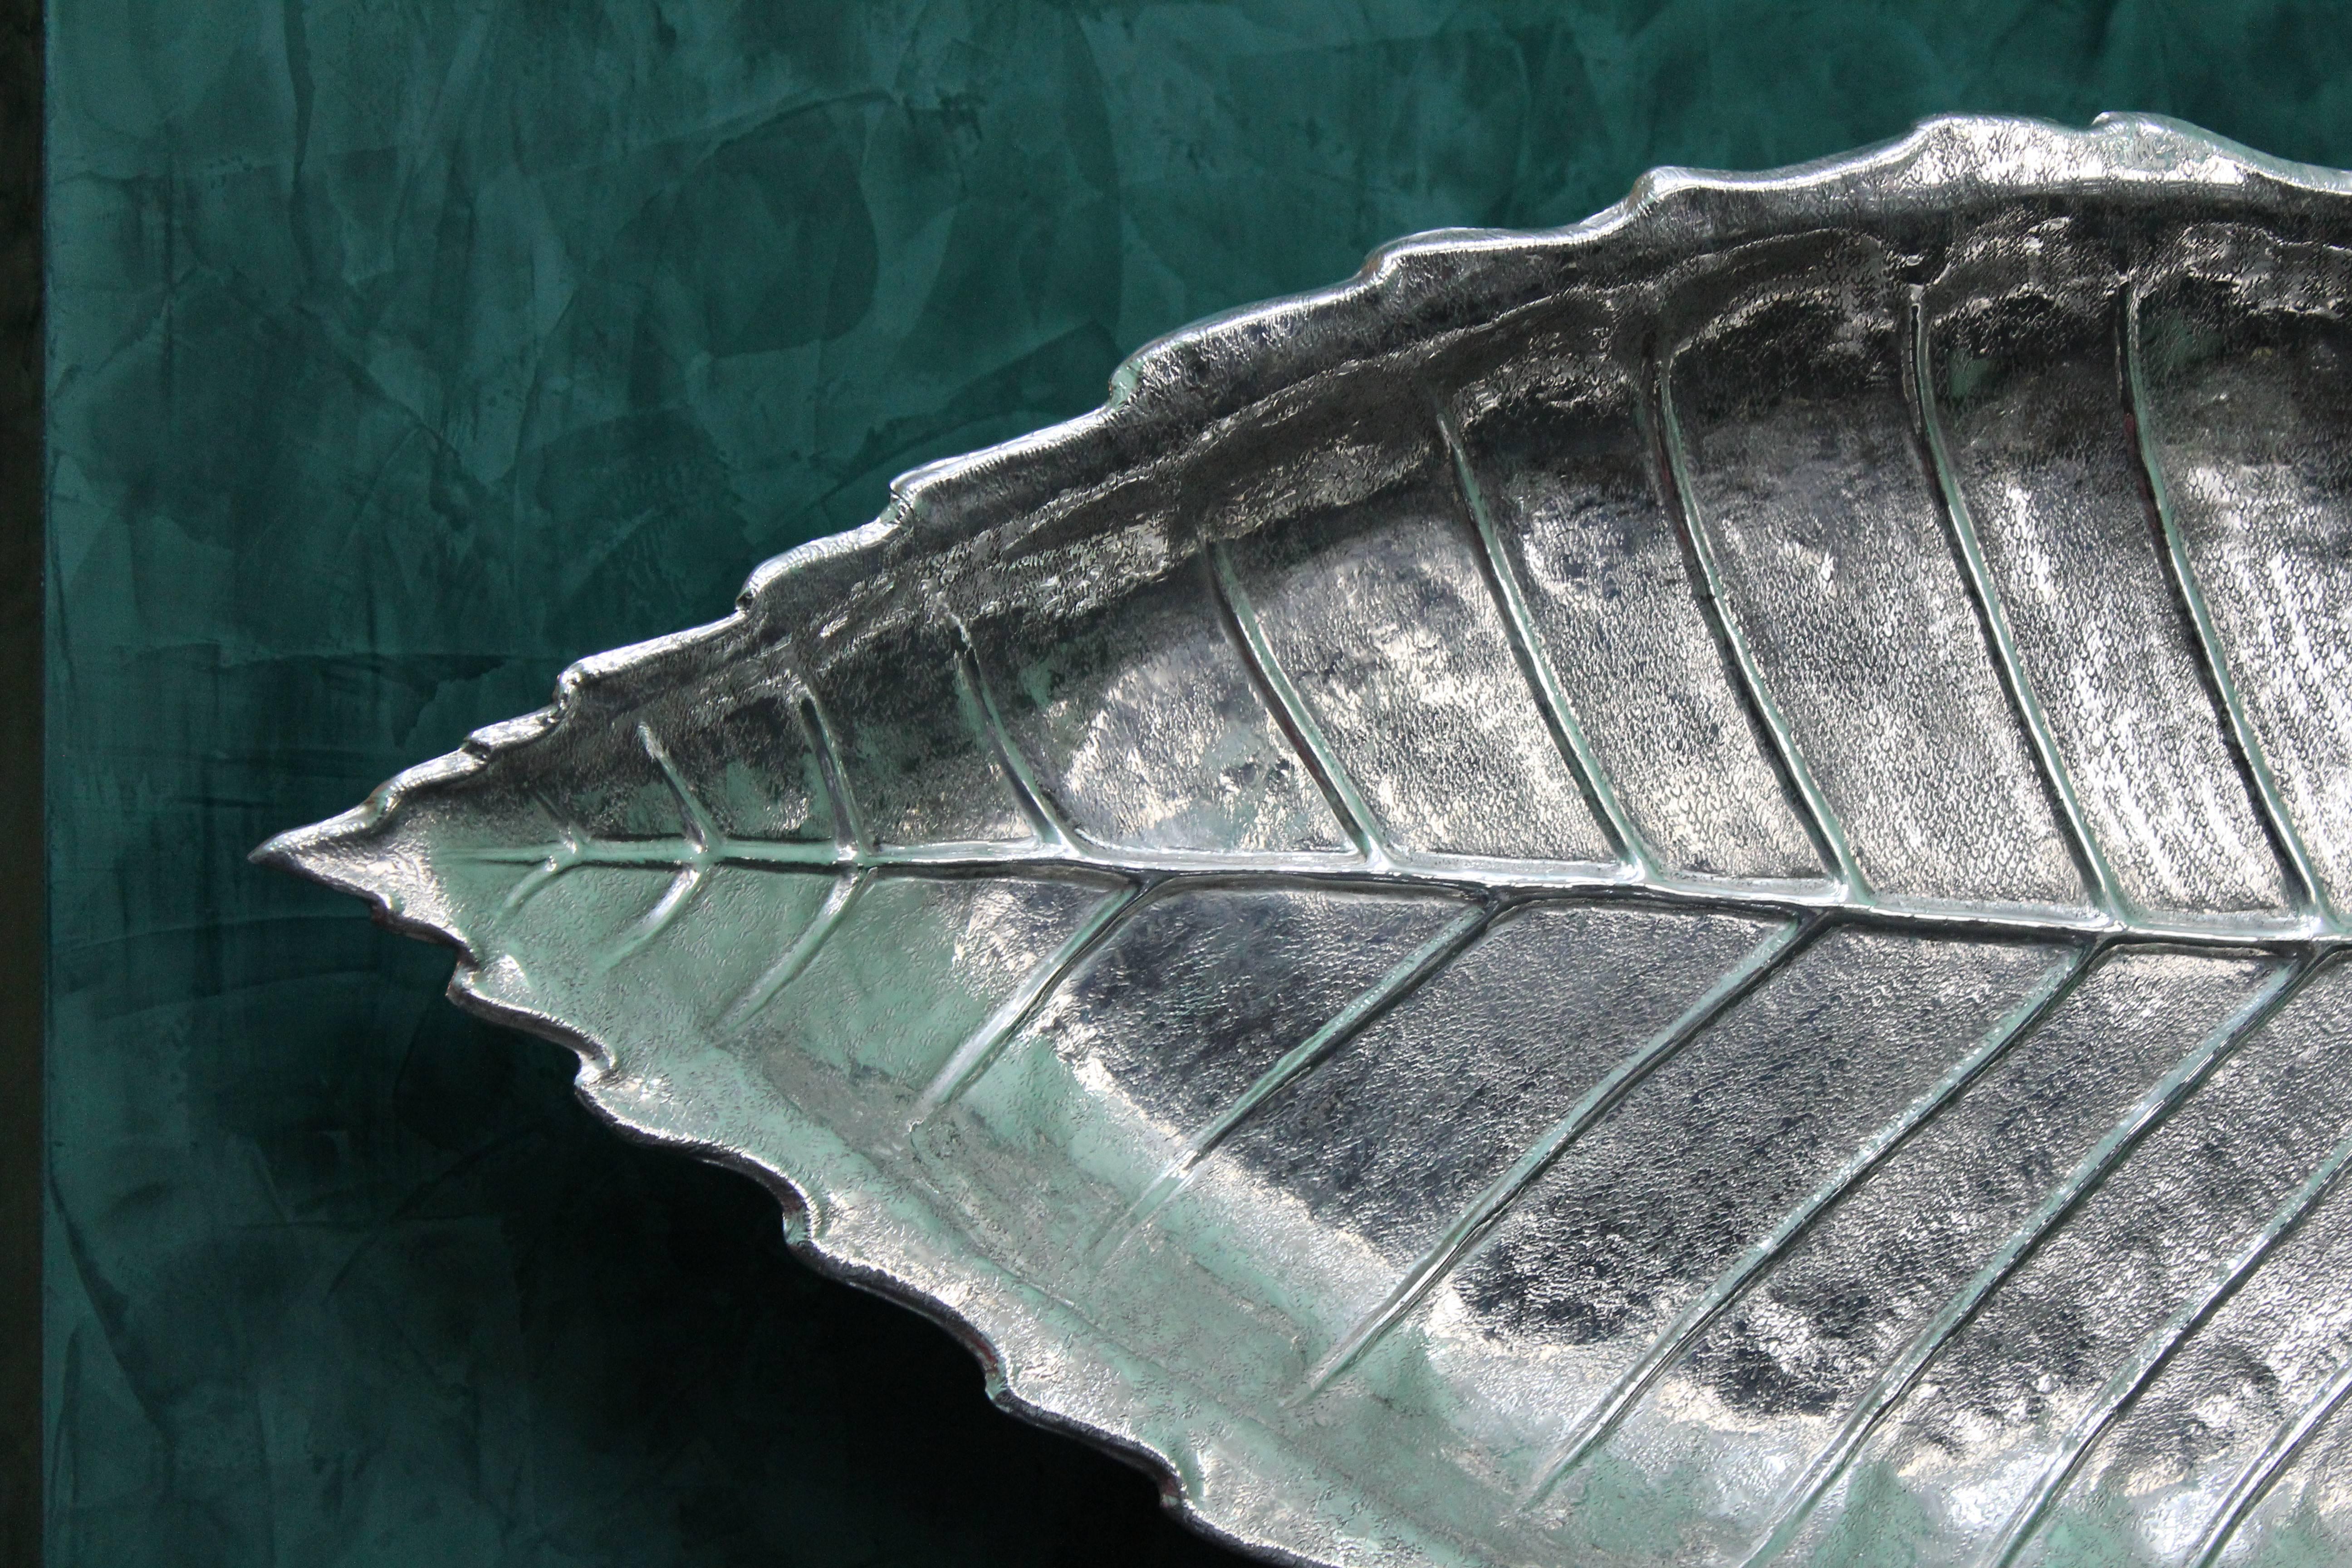 Silver tray leaf shaped, embossed and engraved by hand by Giulo Chiappa Italian silversmith from Milan during the fascism period in Italy (1934-1944).
Wonderful engraving work, in every single detail. Massive dimensions.
Can be easily used to serve